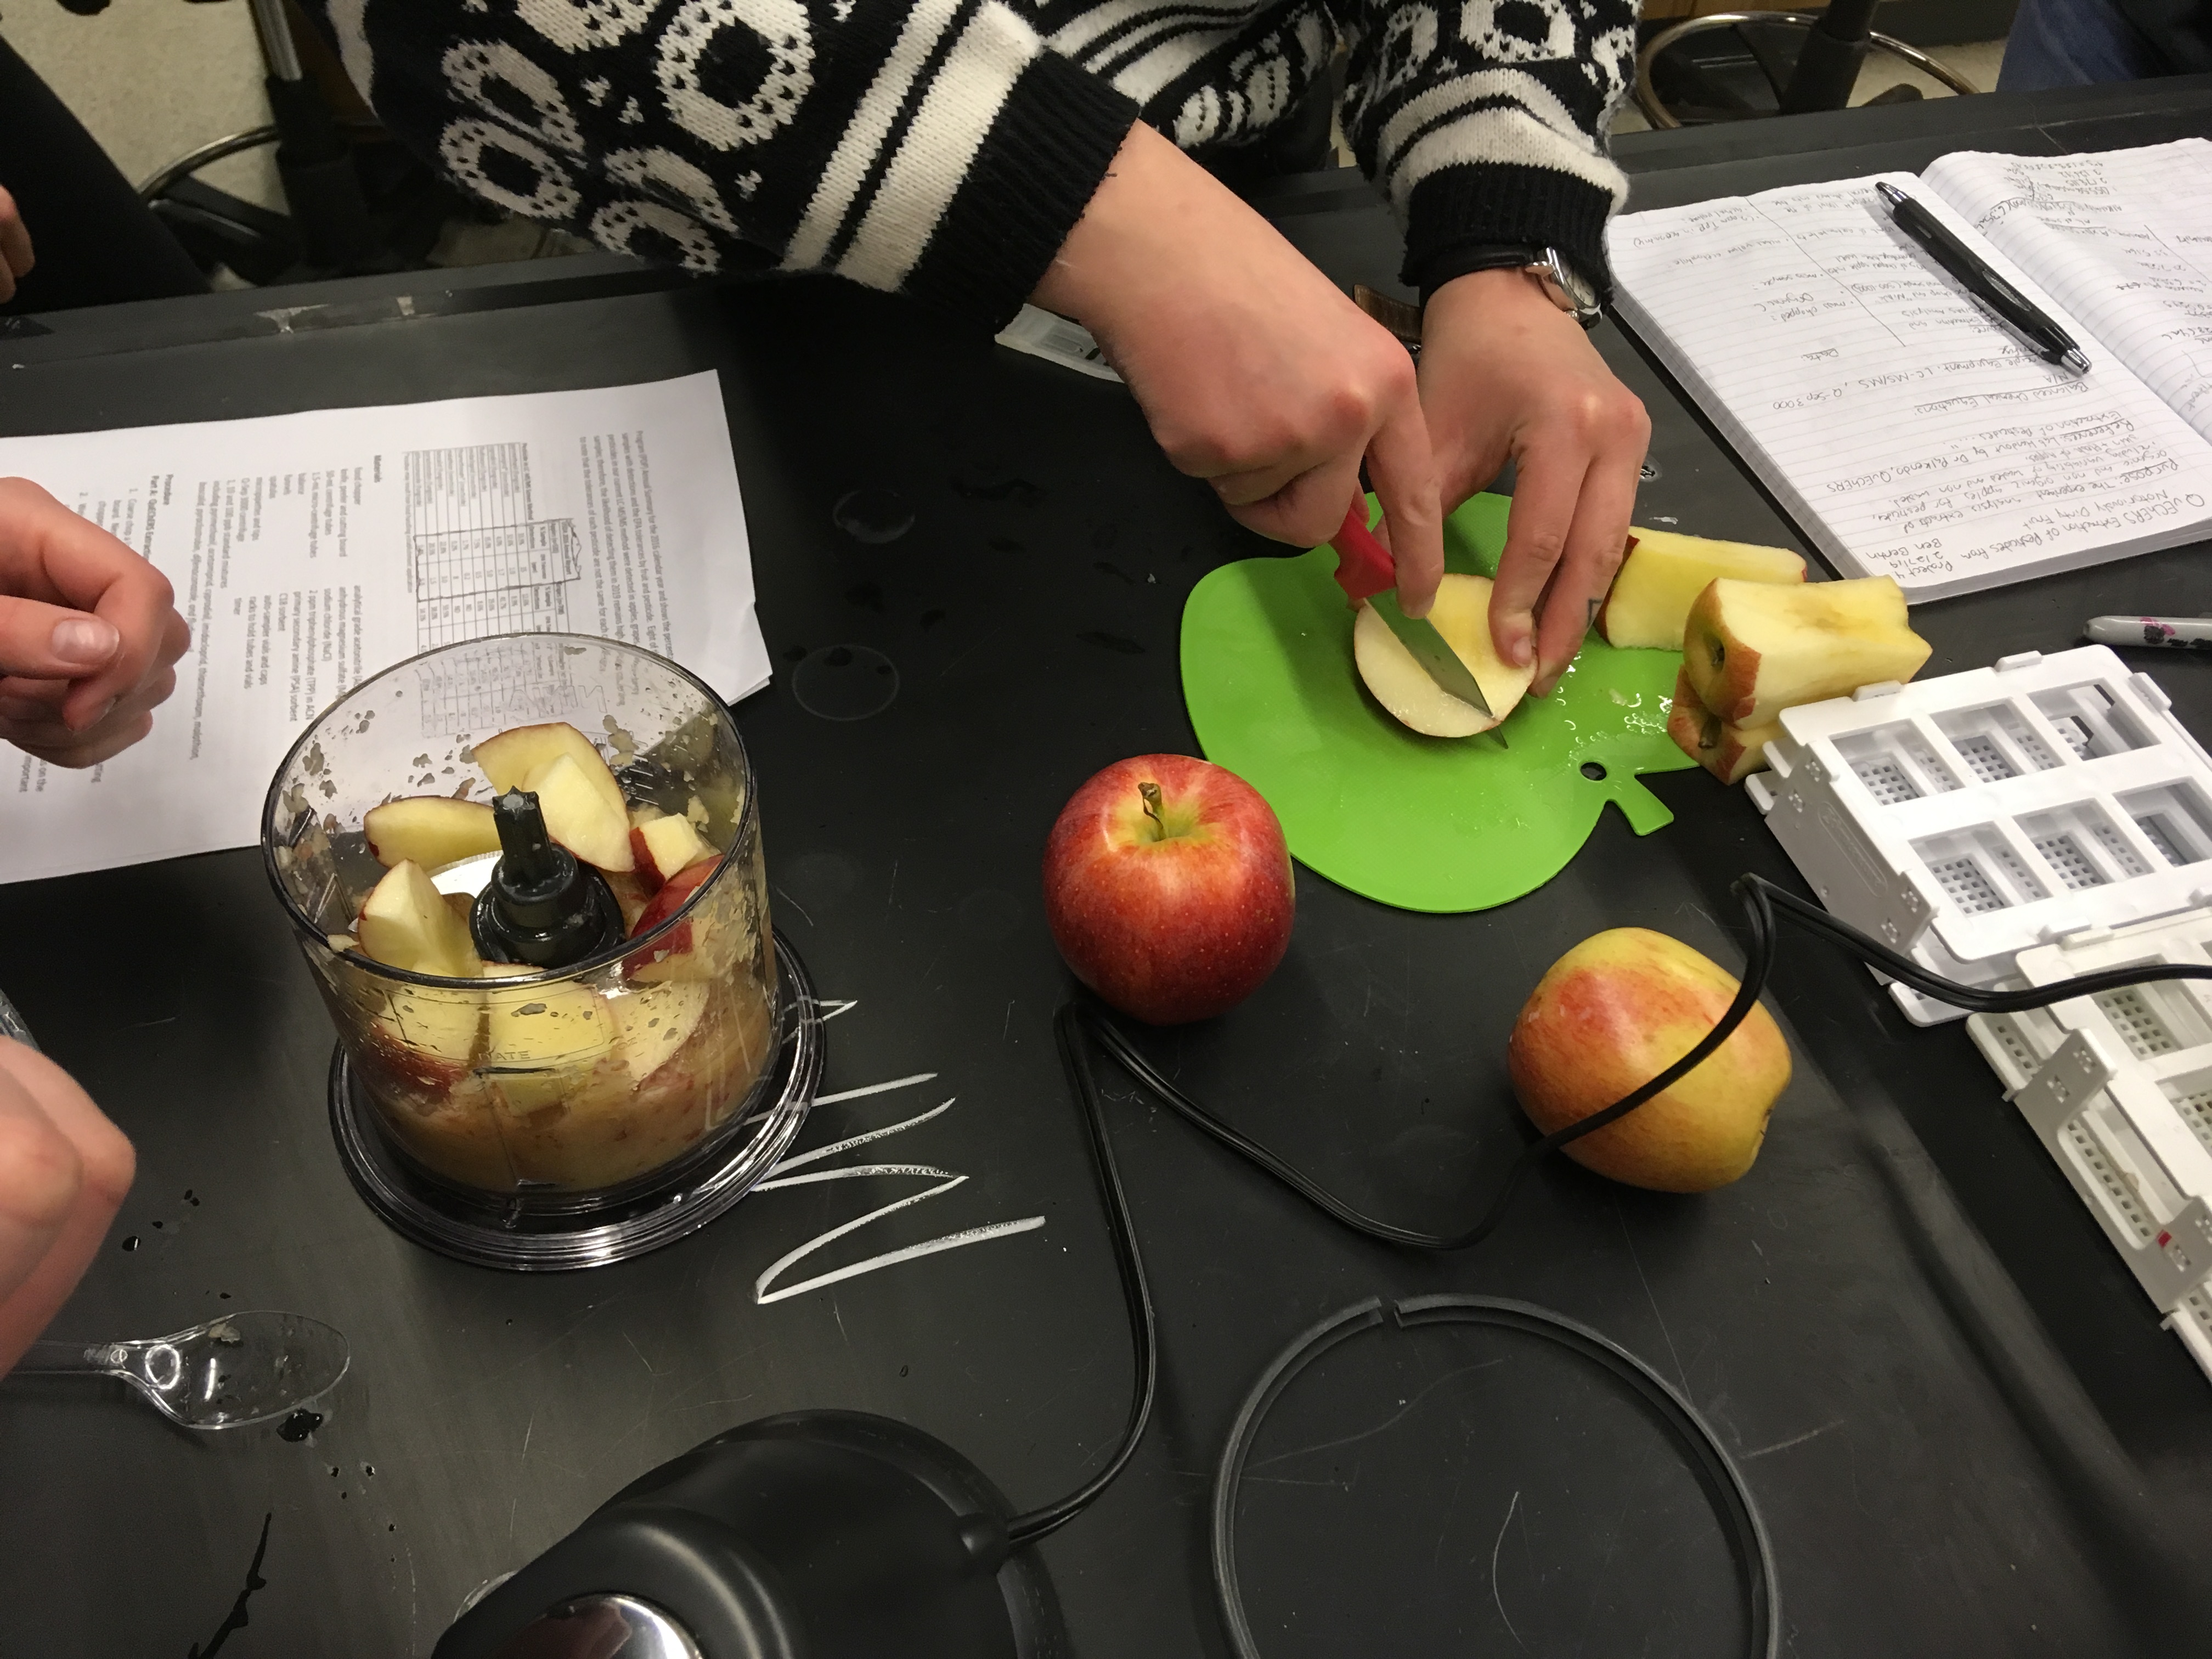 a pair of hands chopping apples and putting them into a food processor on a lab benchtop